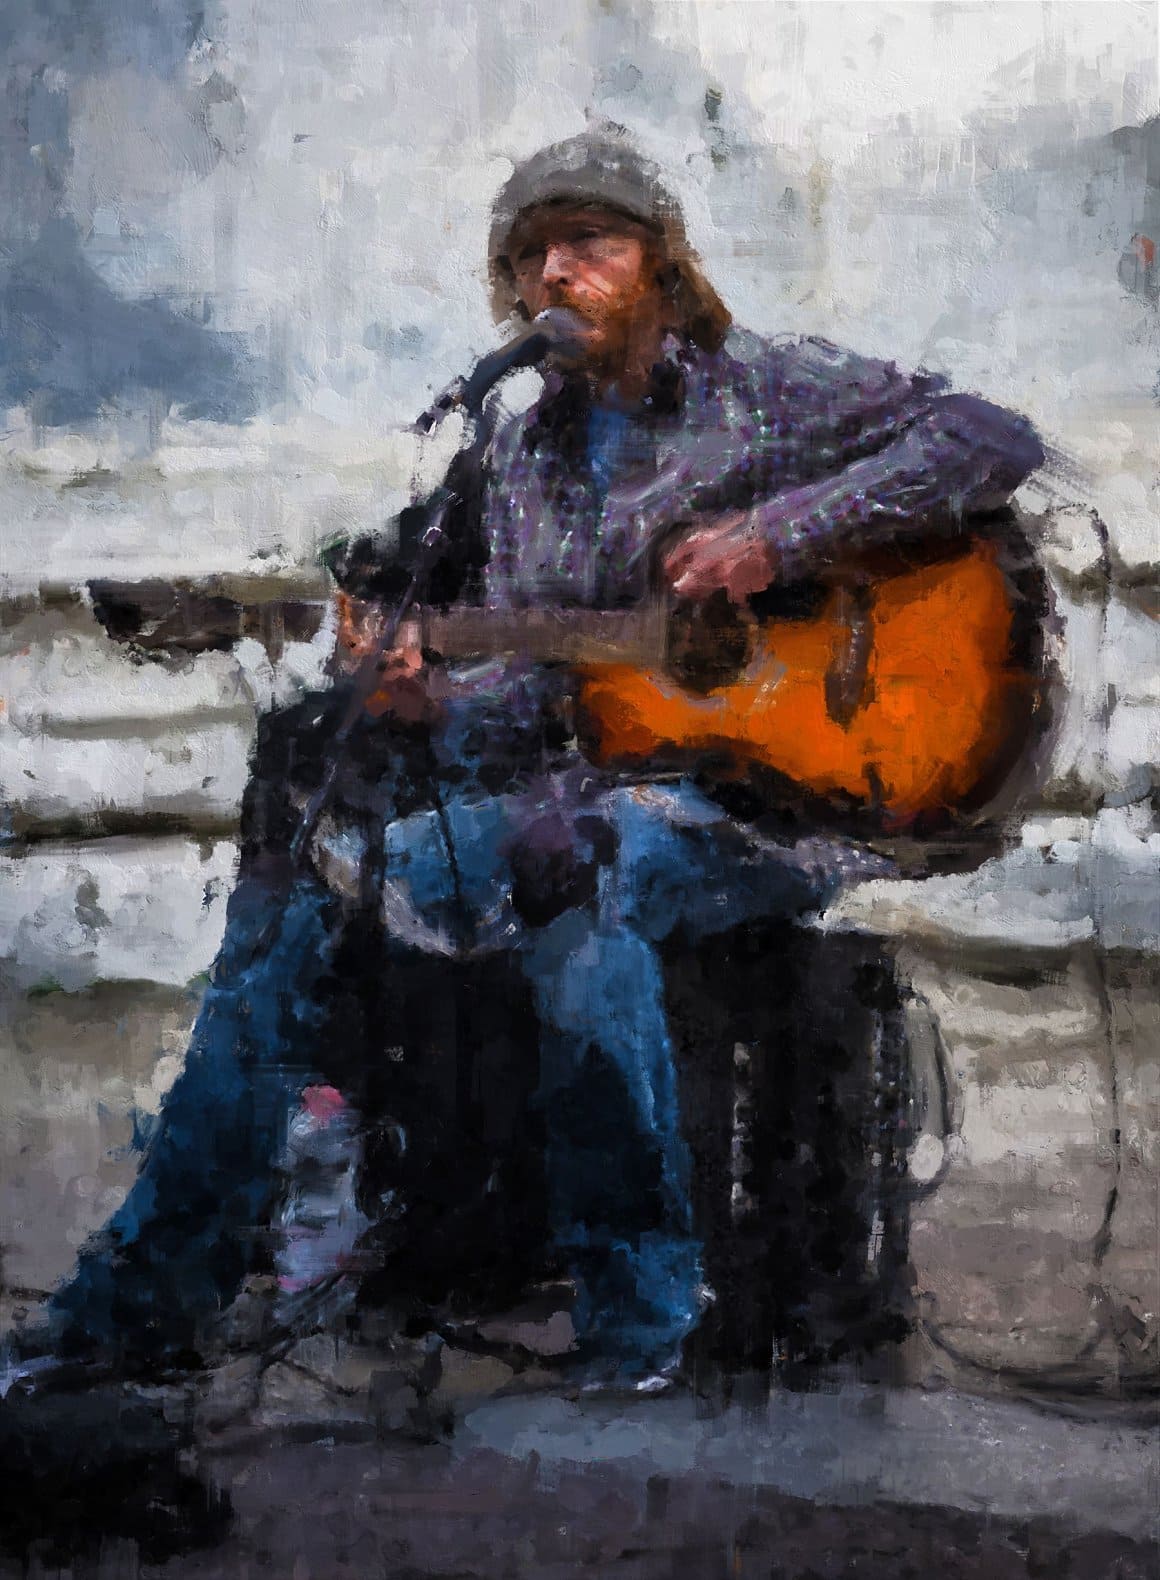 Image of street musician with guitar using Painted Photoshop Effect.